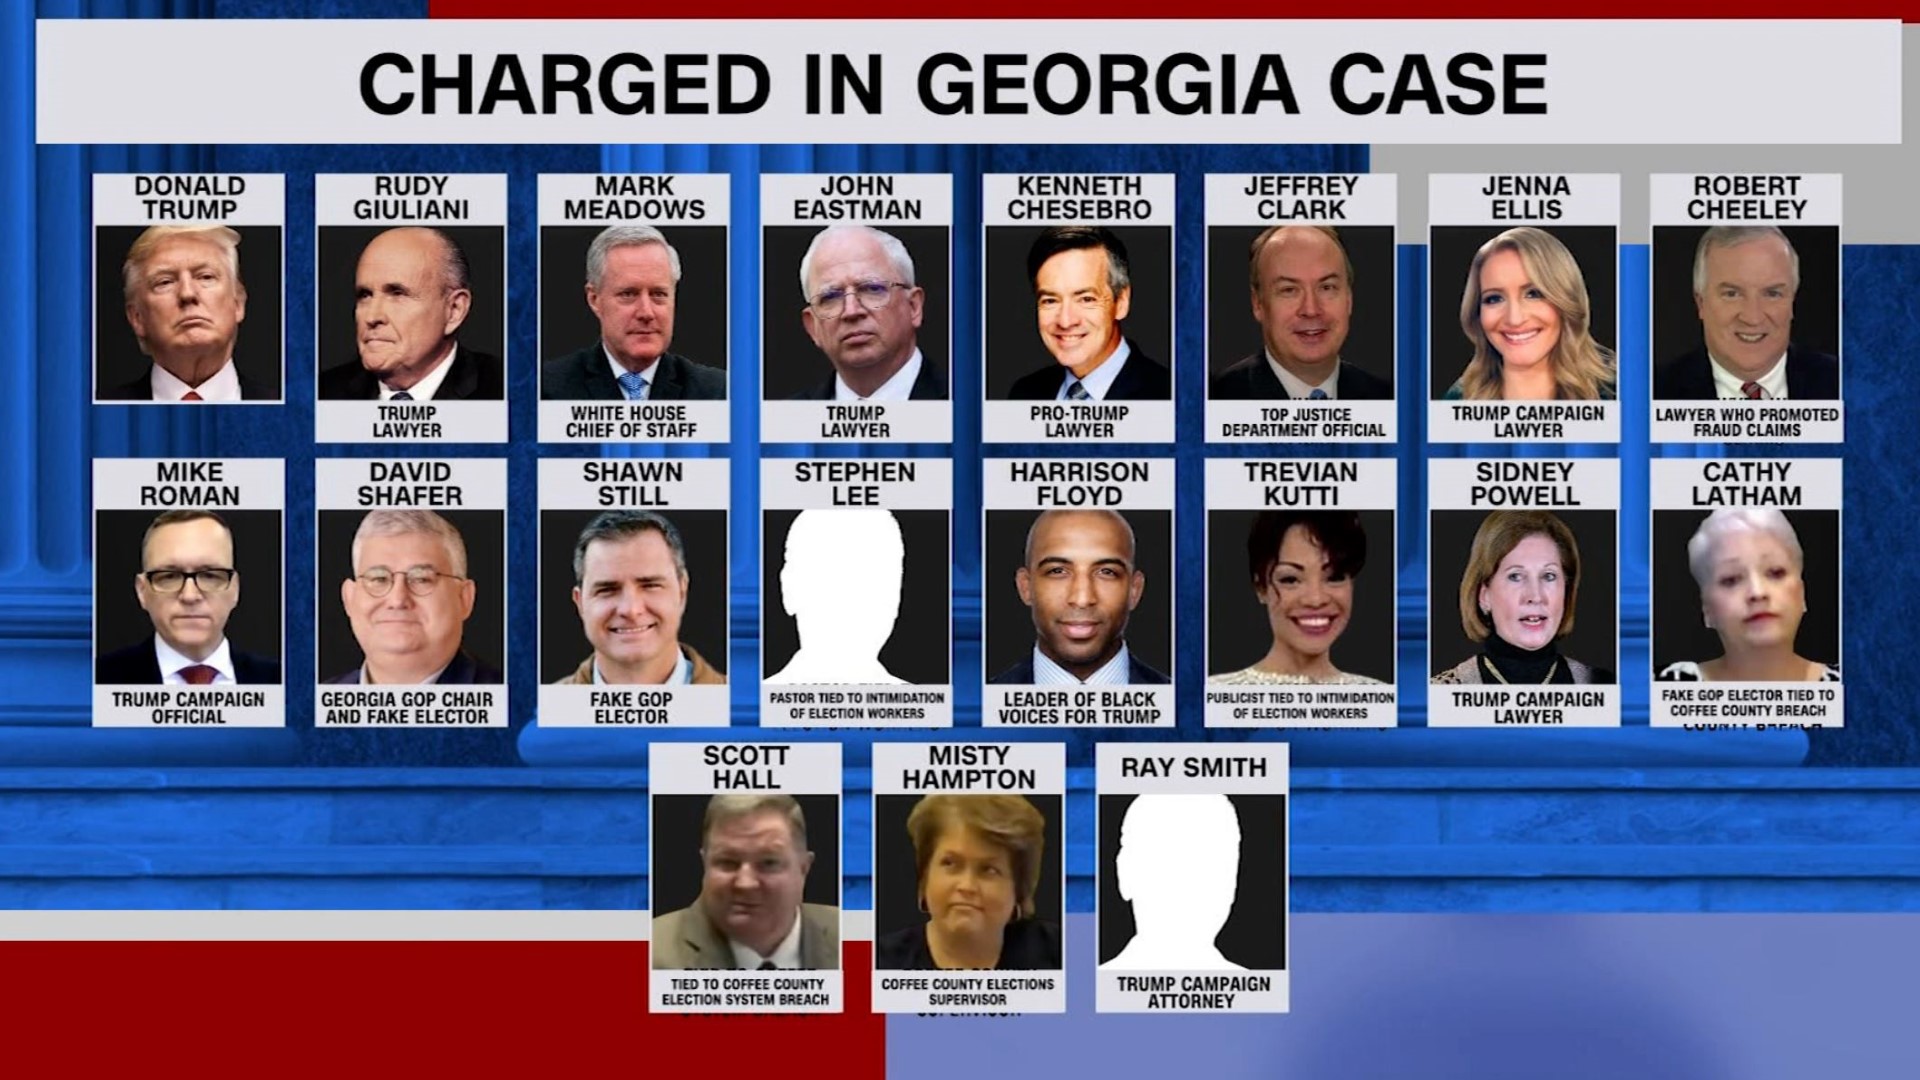 A number of Georgia republicans were also on the charge sheet.